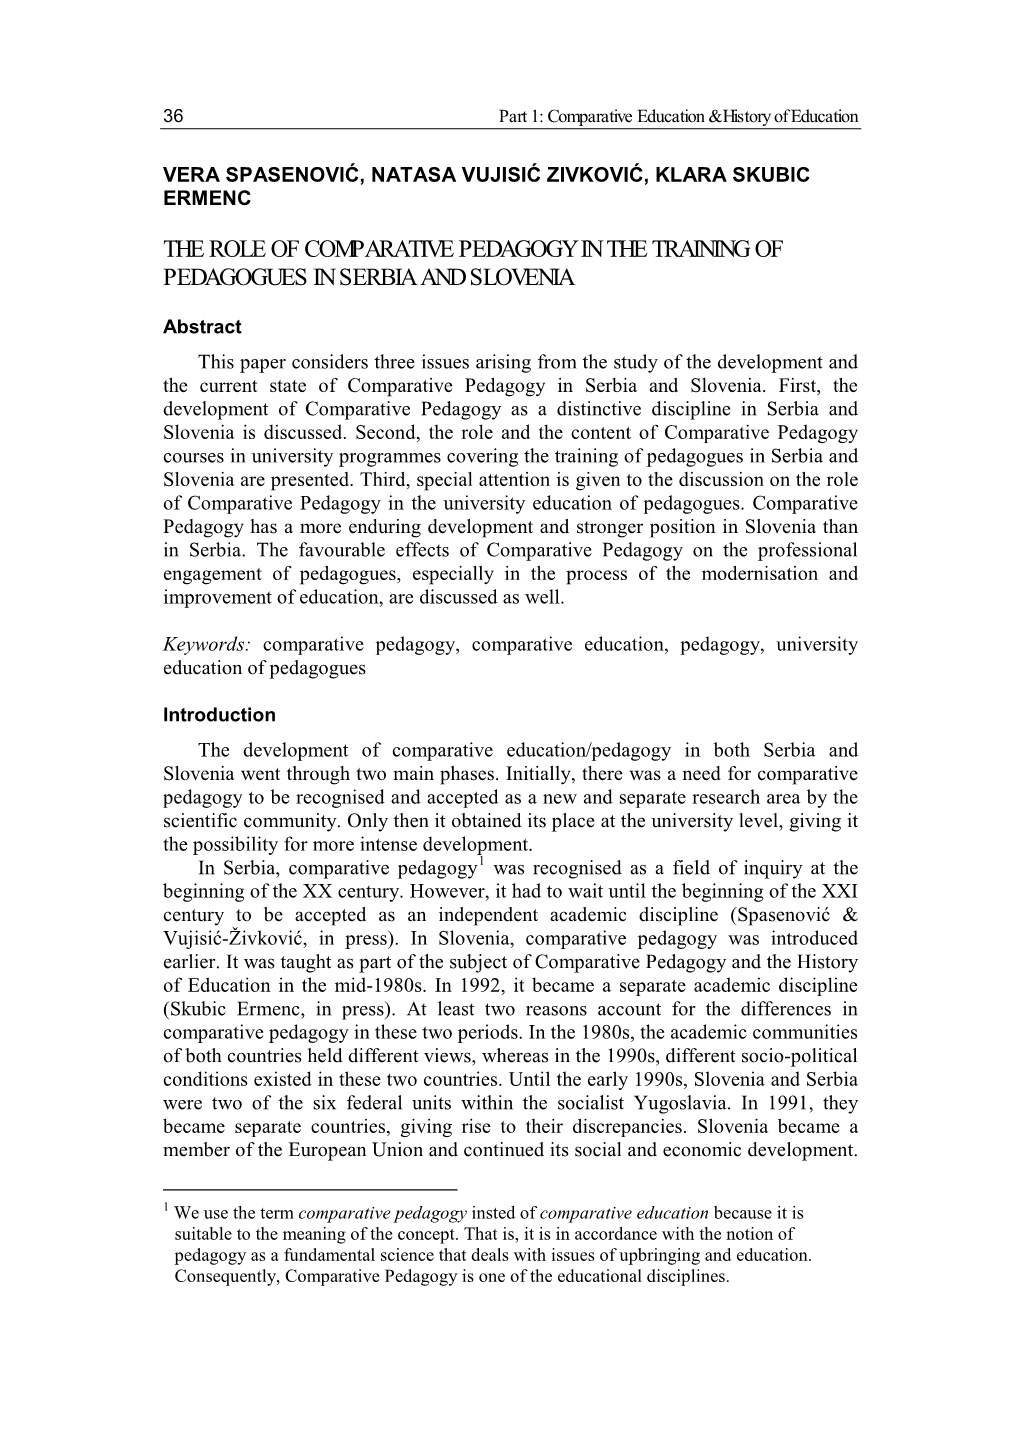 The Role of Comparative Pedagogy in the Training of Pedagogues in Serbia and Slovenia